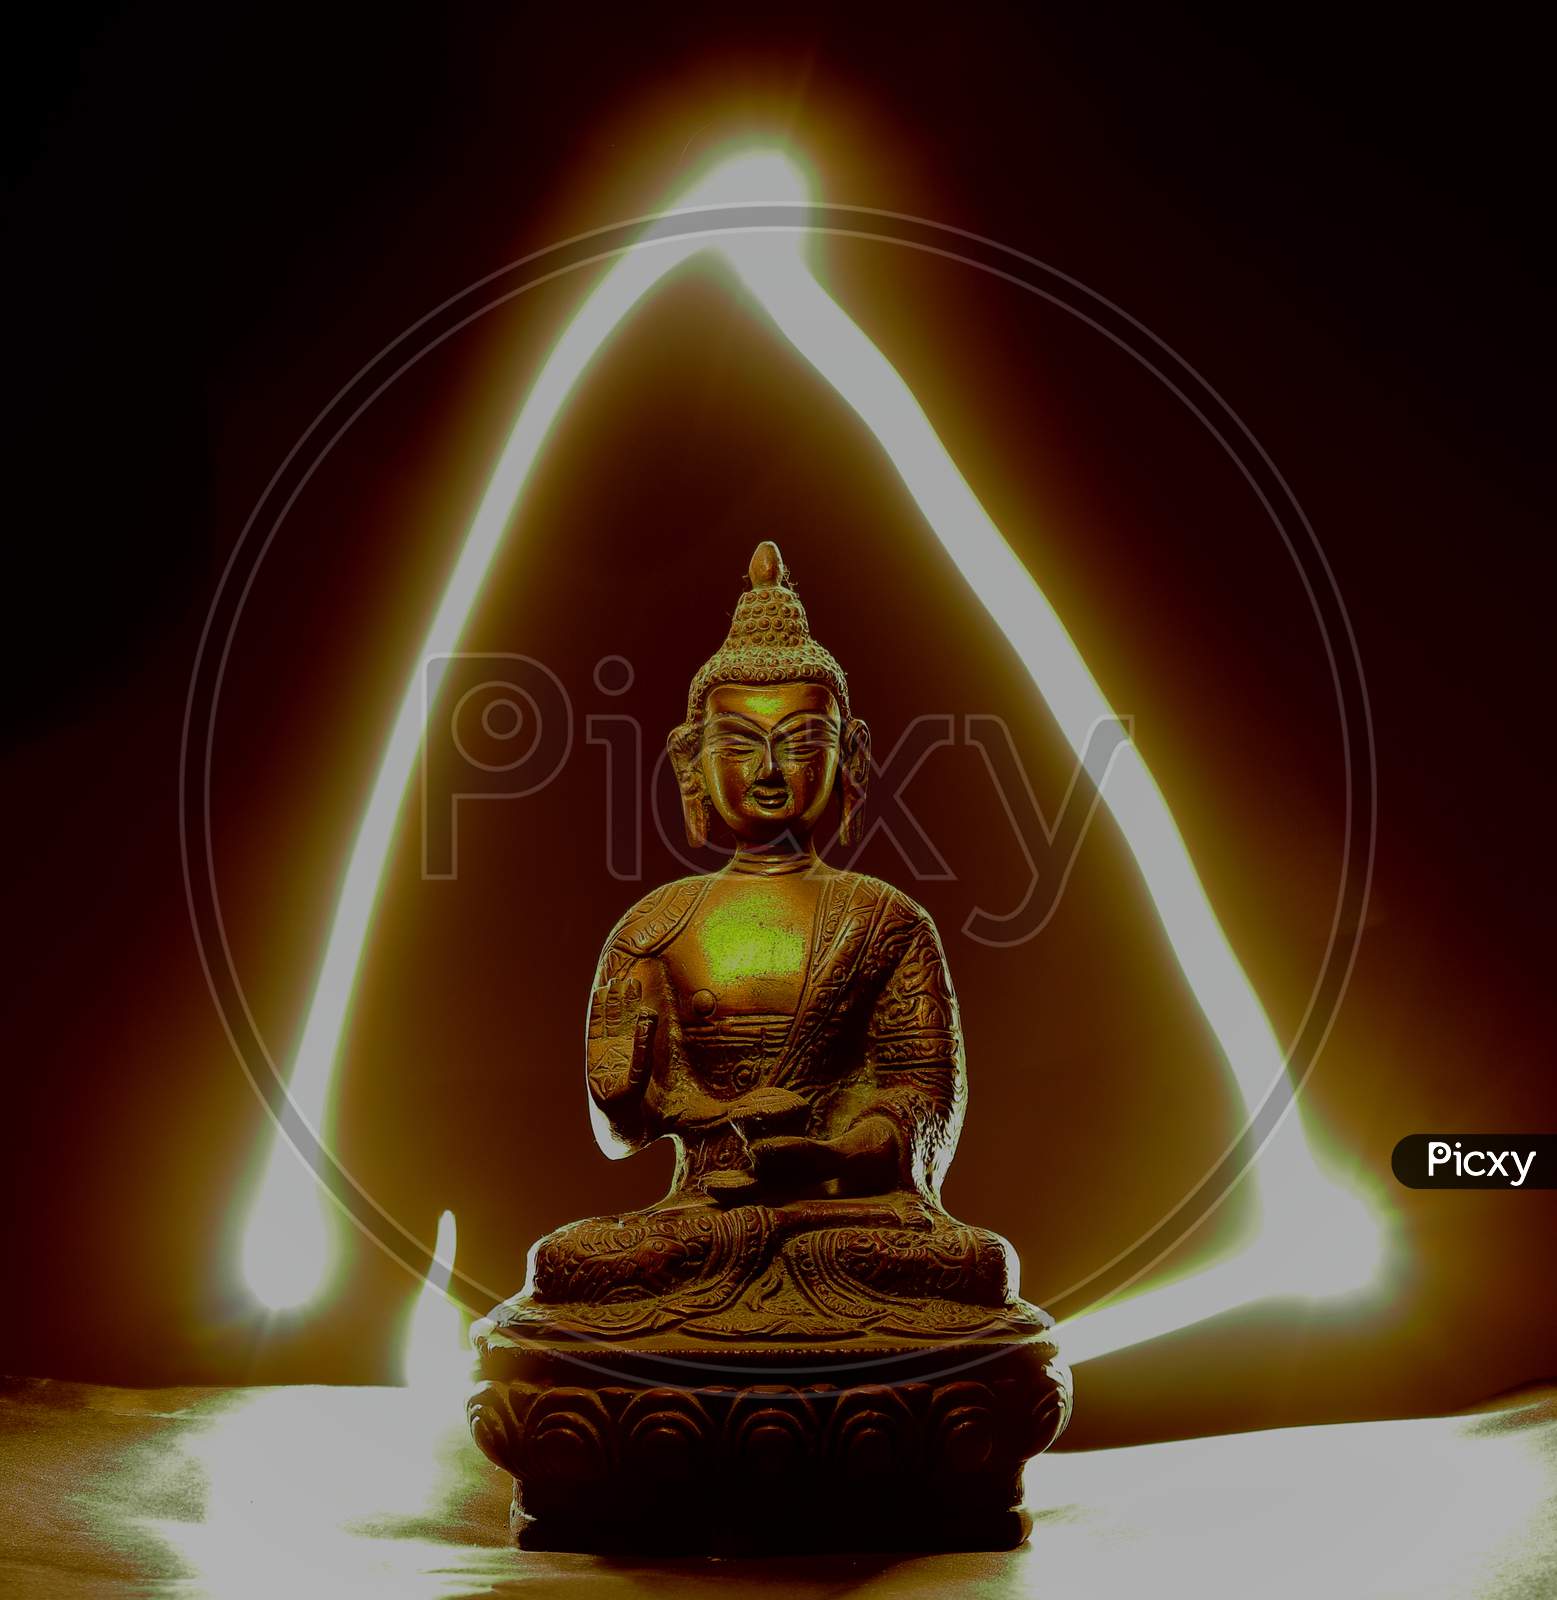 Metal buddha statue with patterns of light on the background